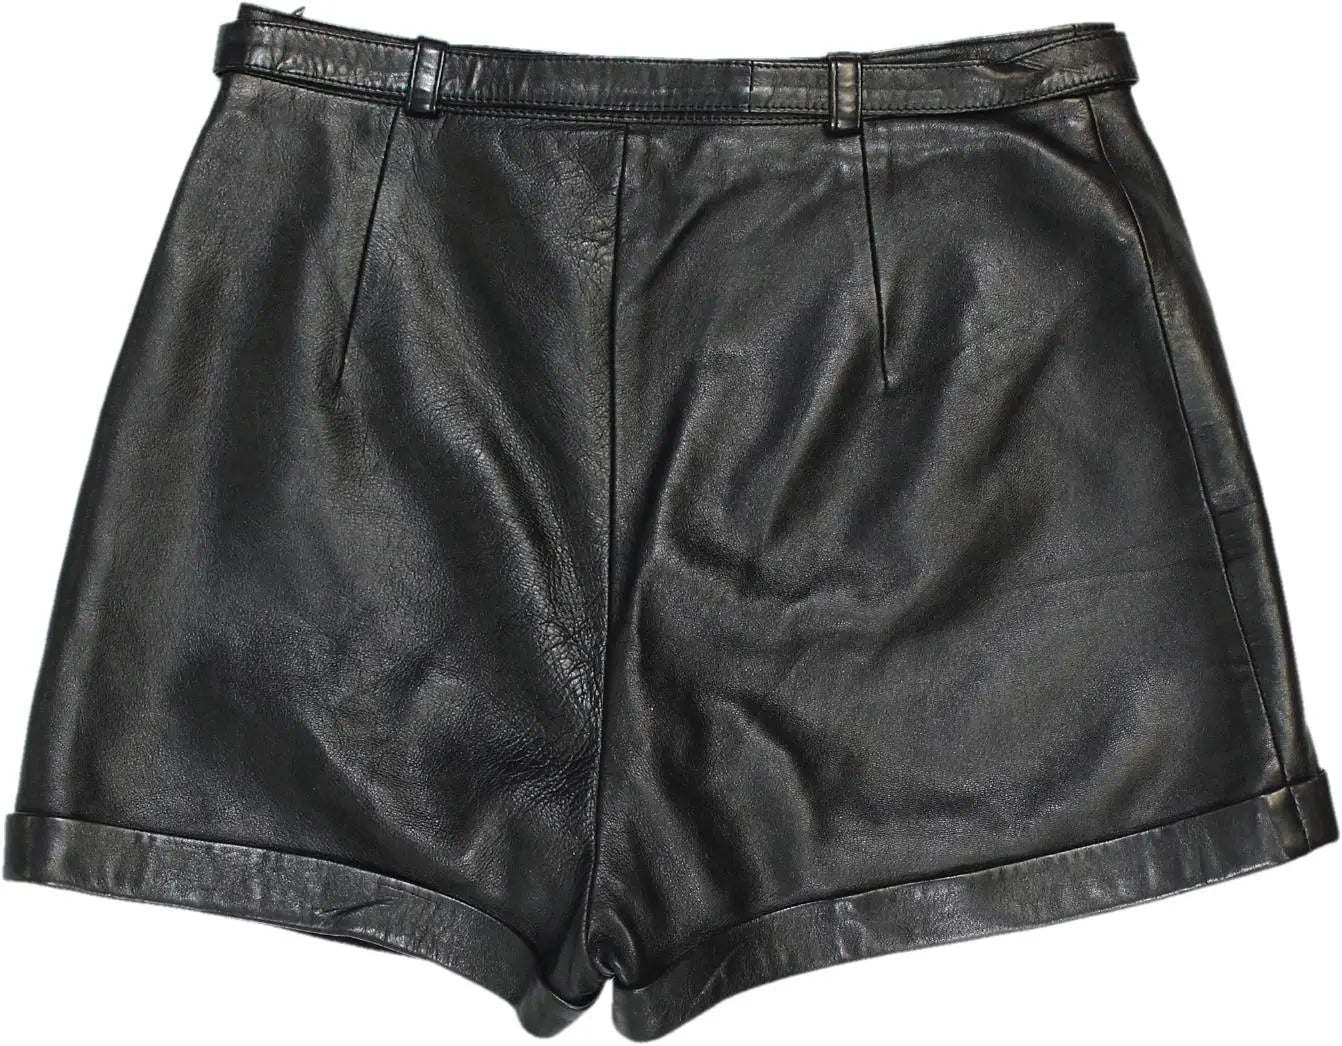 Gianni Versace - 00s Gianni Versace Leather Shorts- ThriftTale.com - Vintage and second handclothing